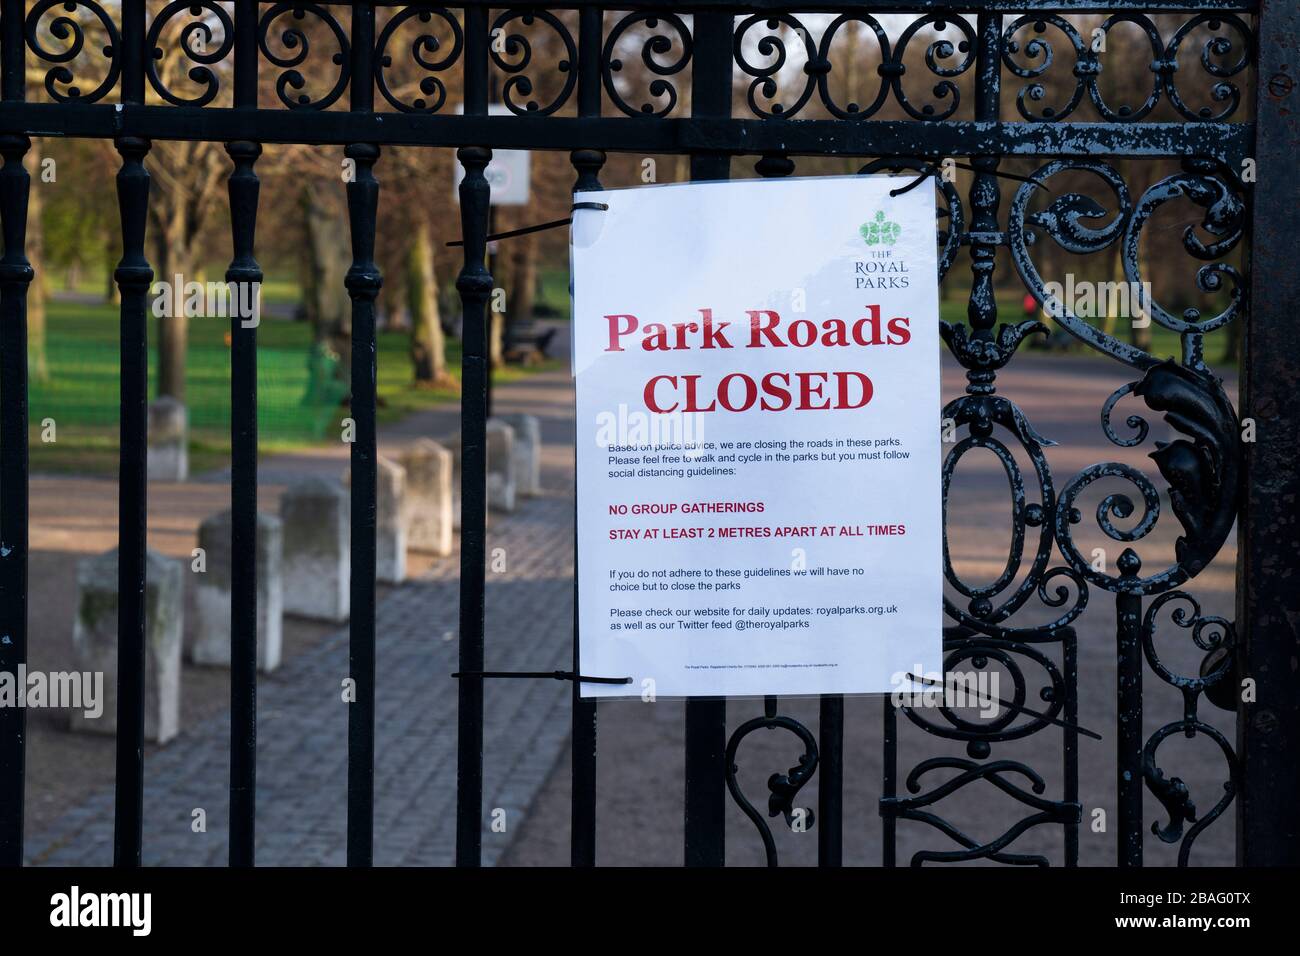 Coronavirus causes closures of parks, tourist spots, markets and transport in Greenwich, London, UK. Stock Photo